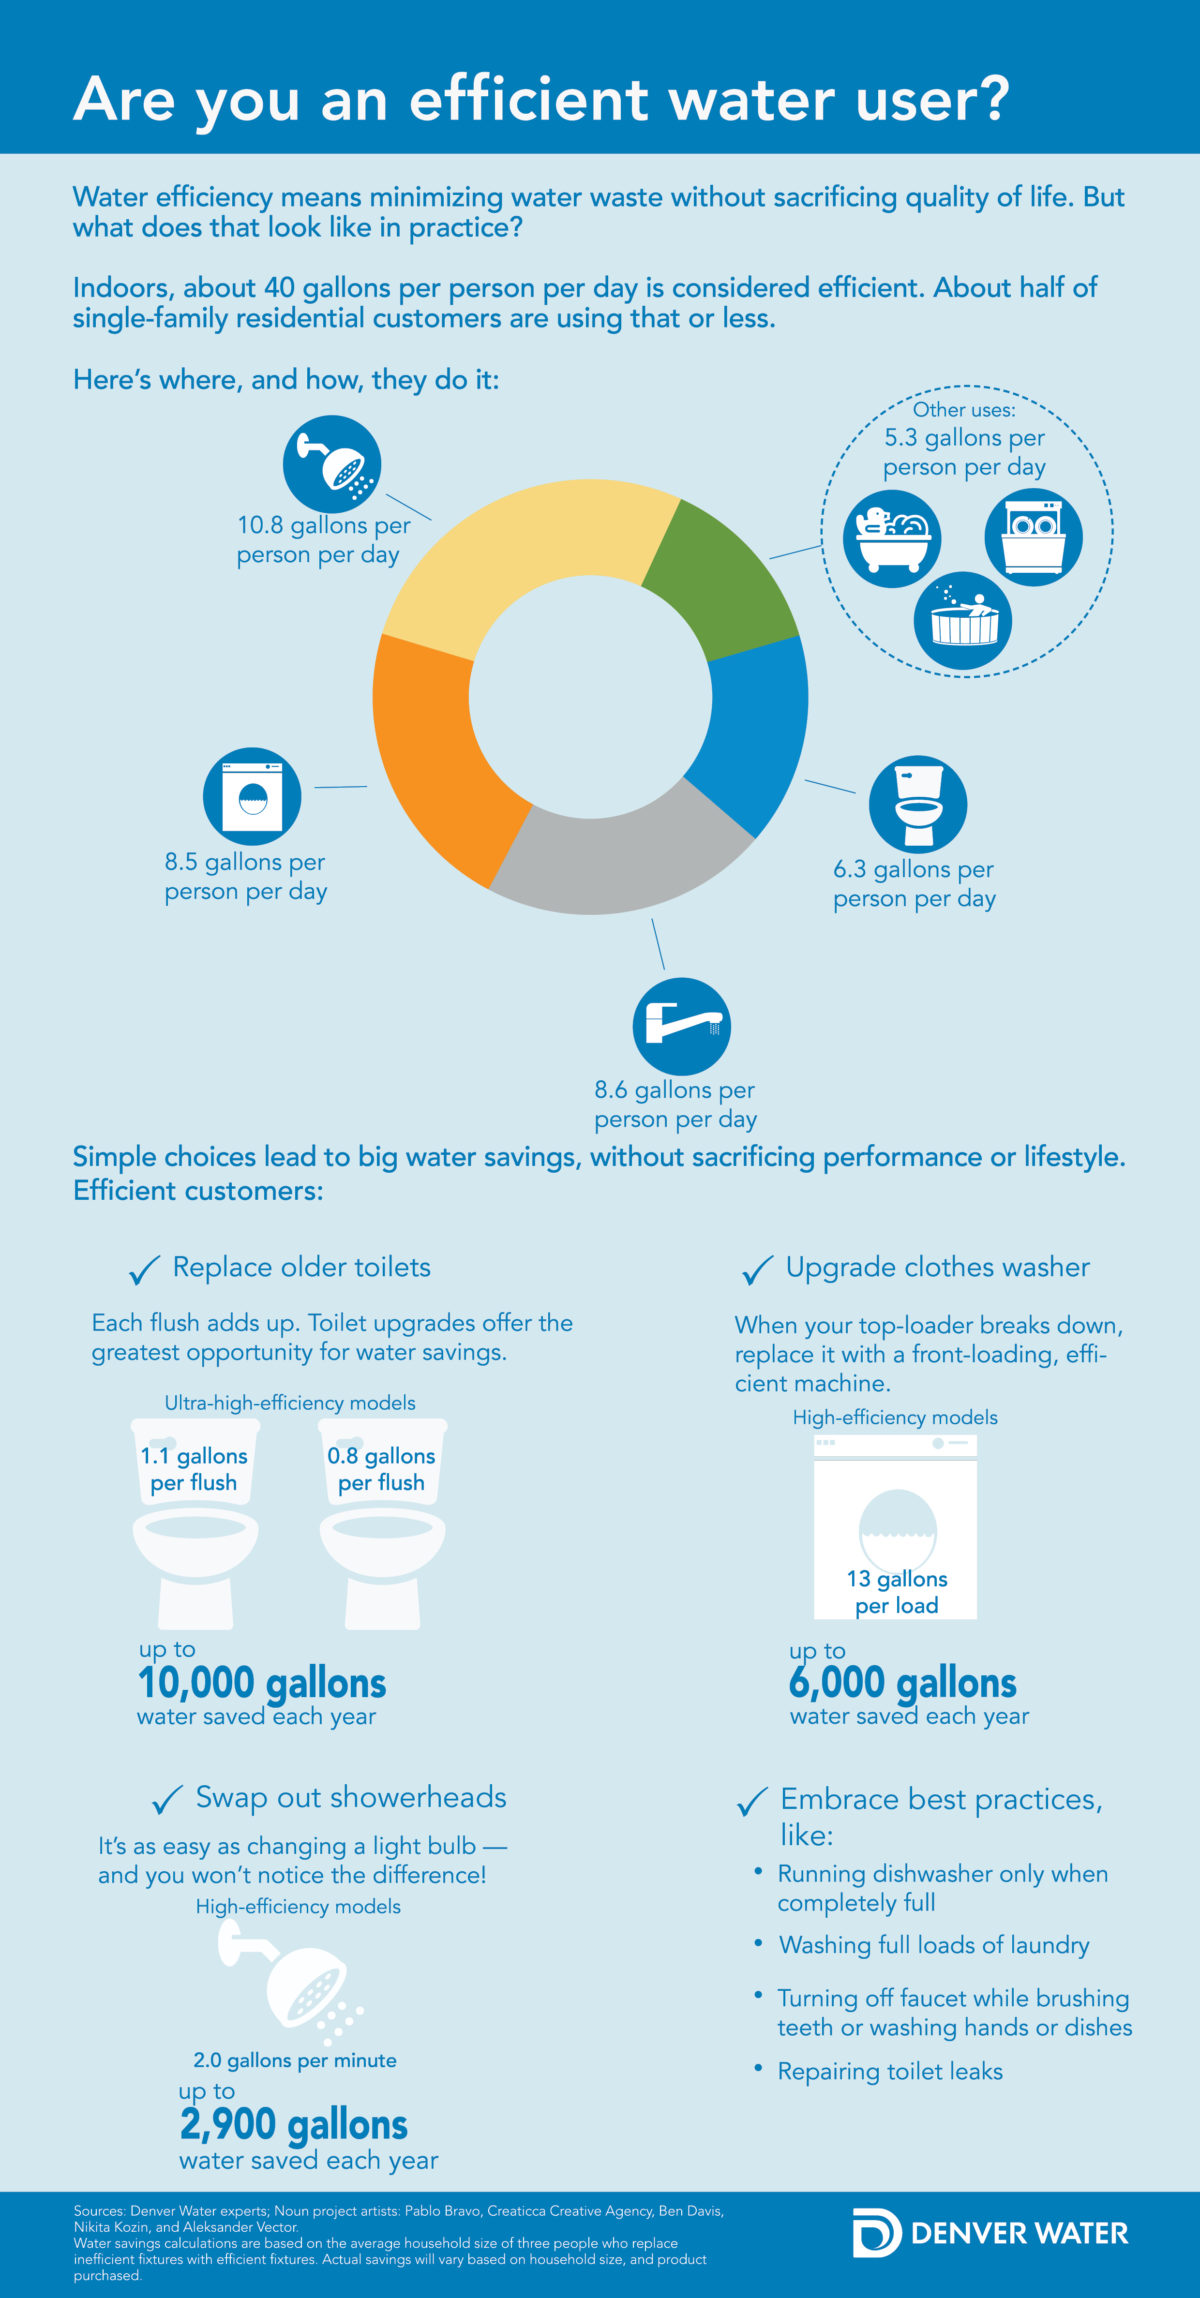 Are you an efficient water user? Graphic